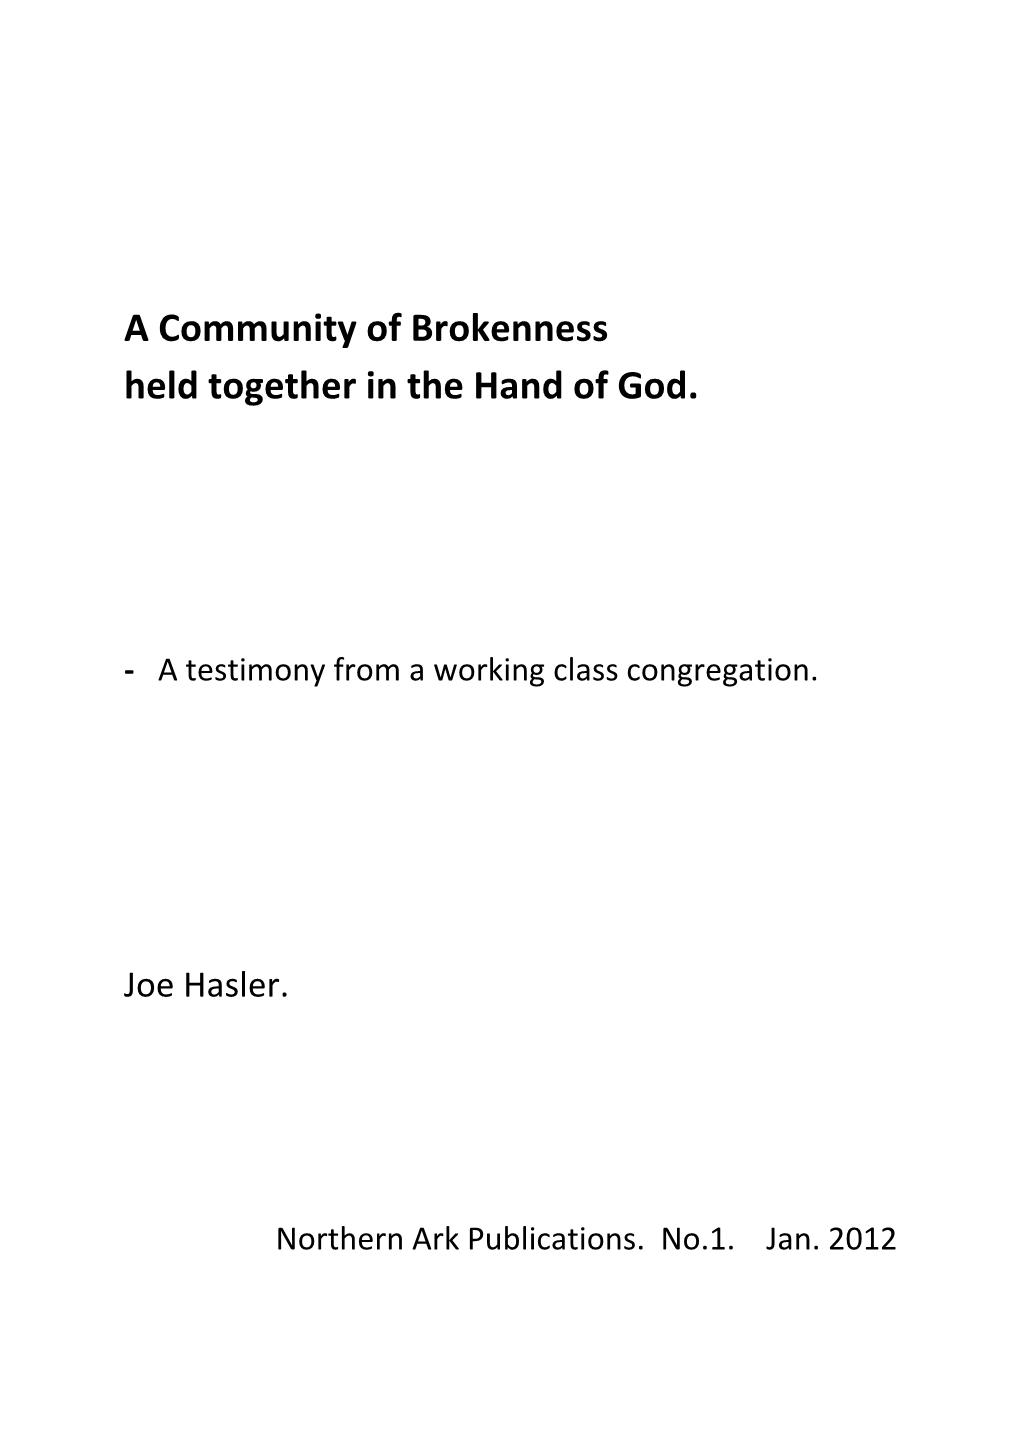 A Community of Brokenness Held Together in the Hand of God